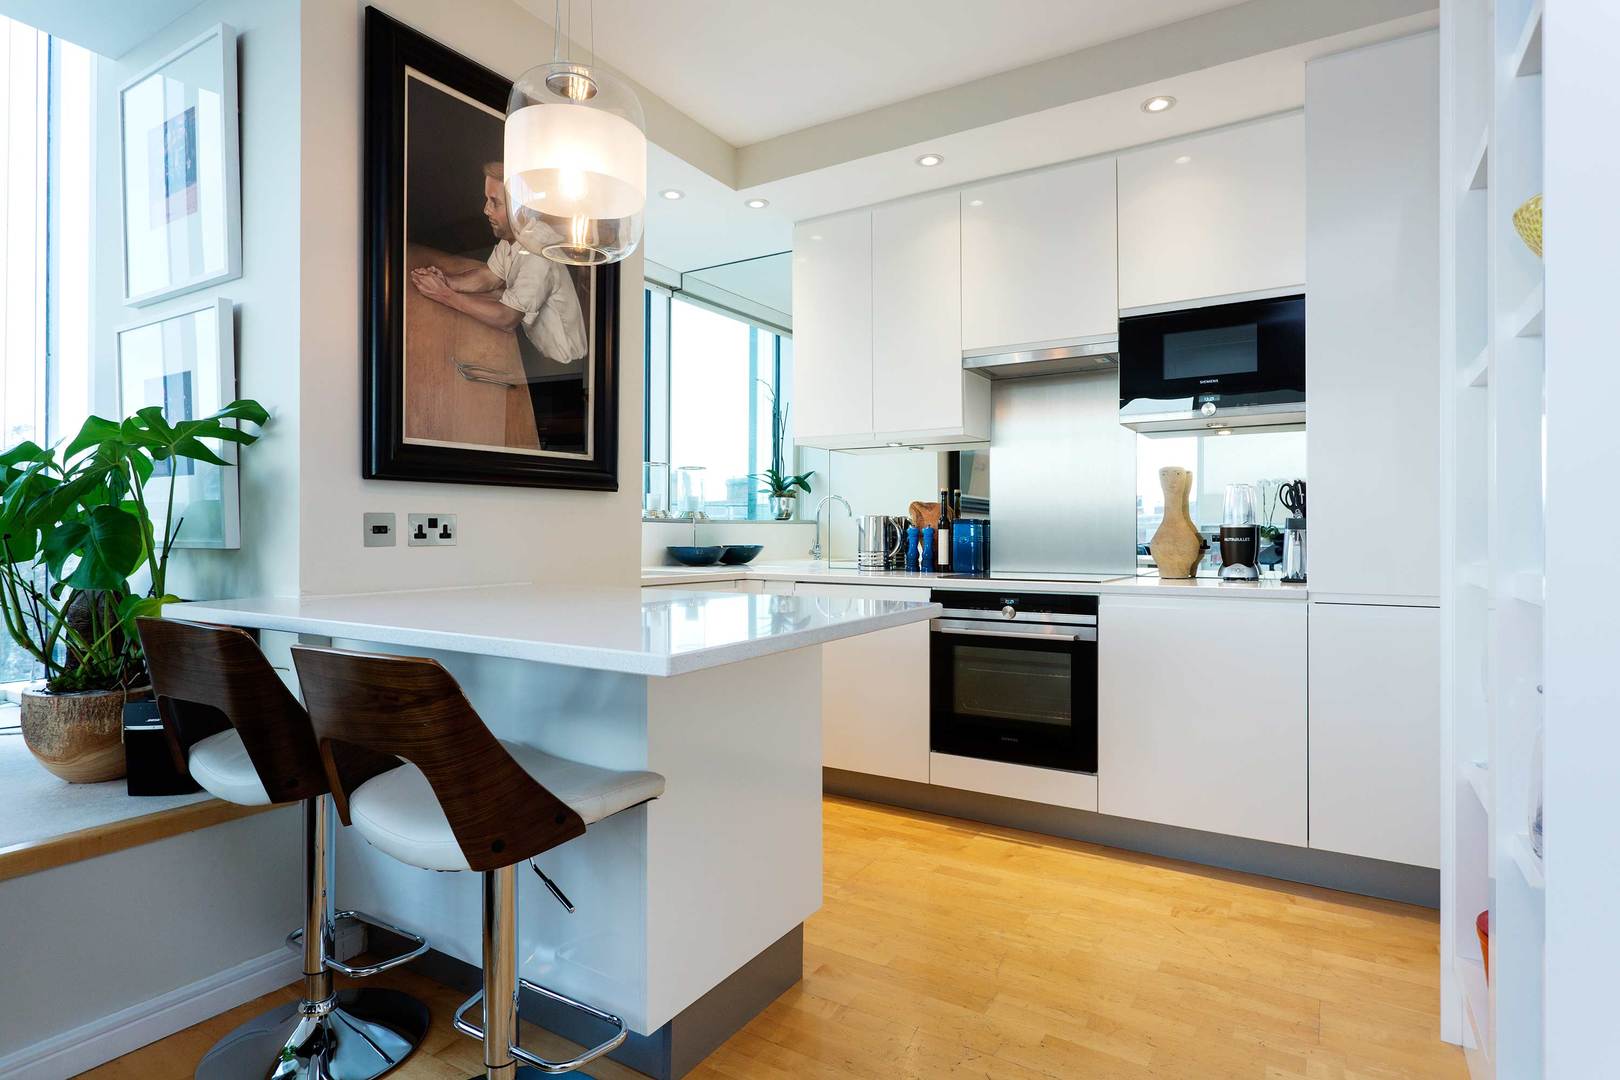 Property Image 2 - Beautifully Designed Flat close to the River Thames